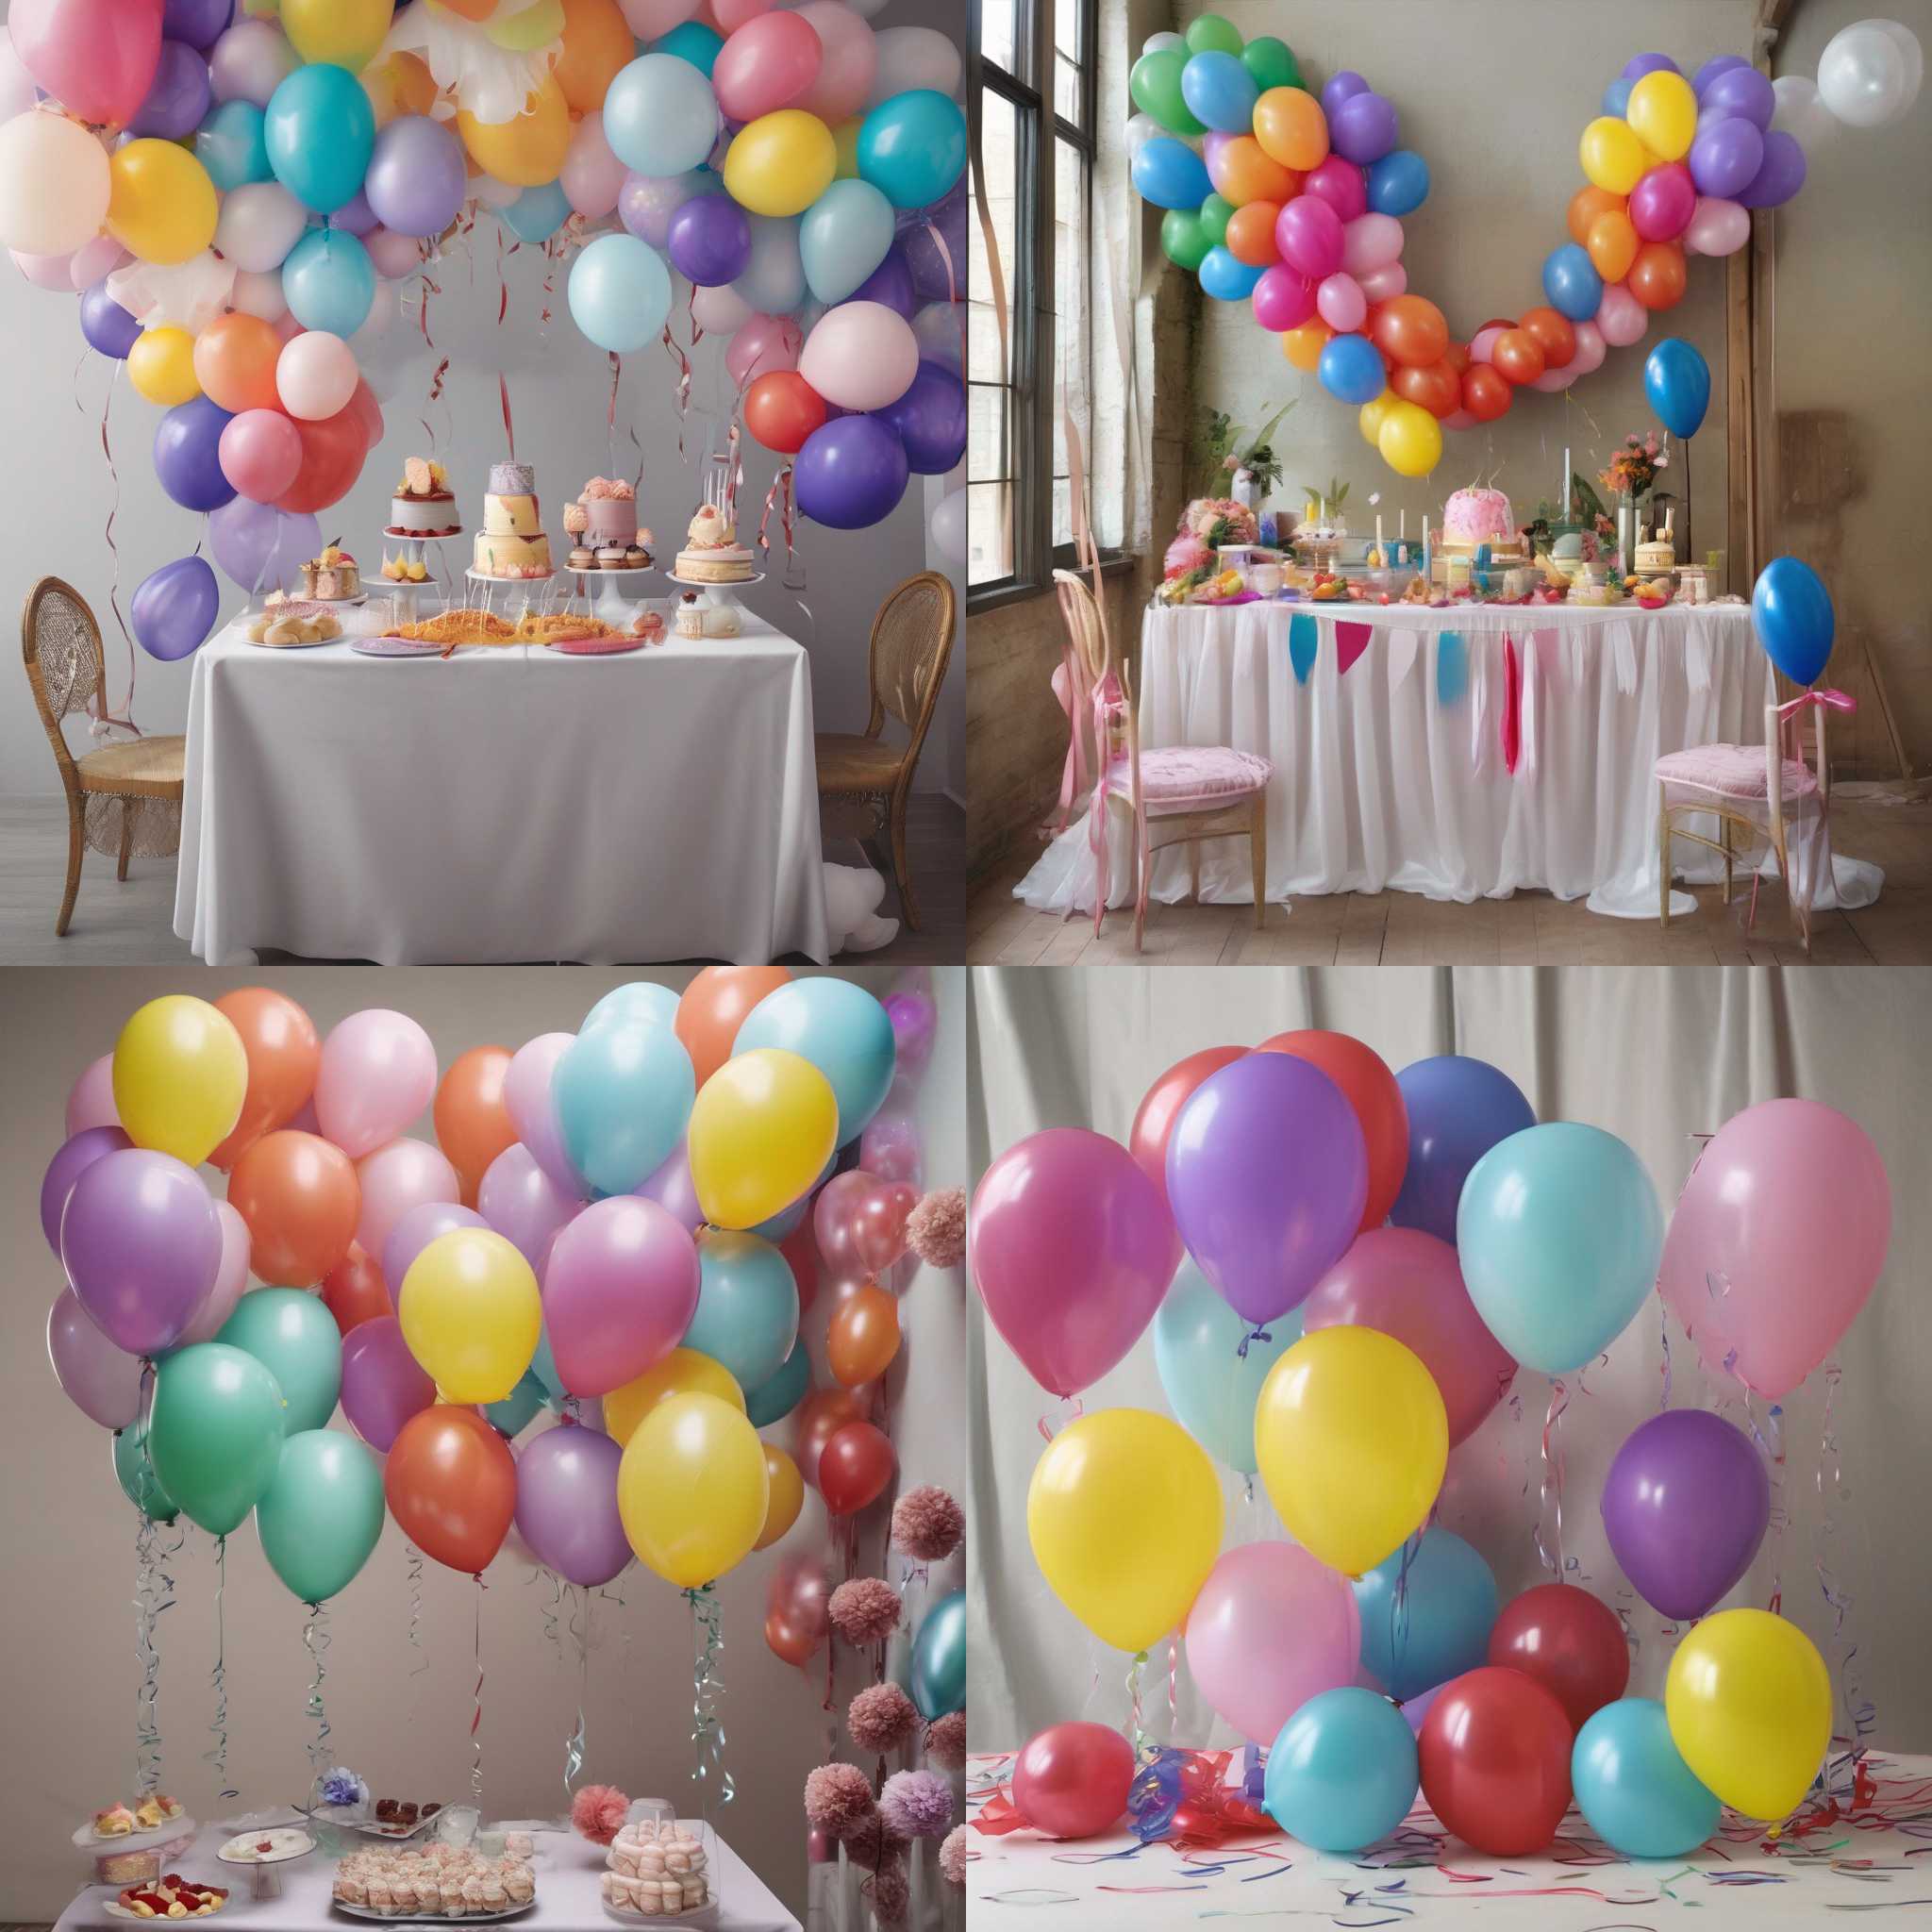 party balloons decorating a party